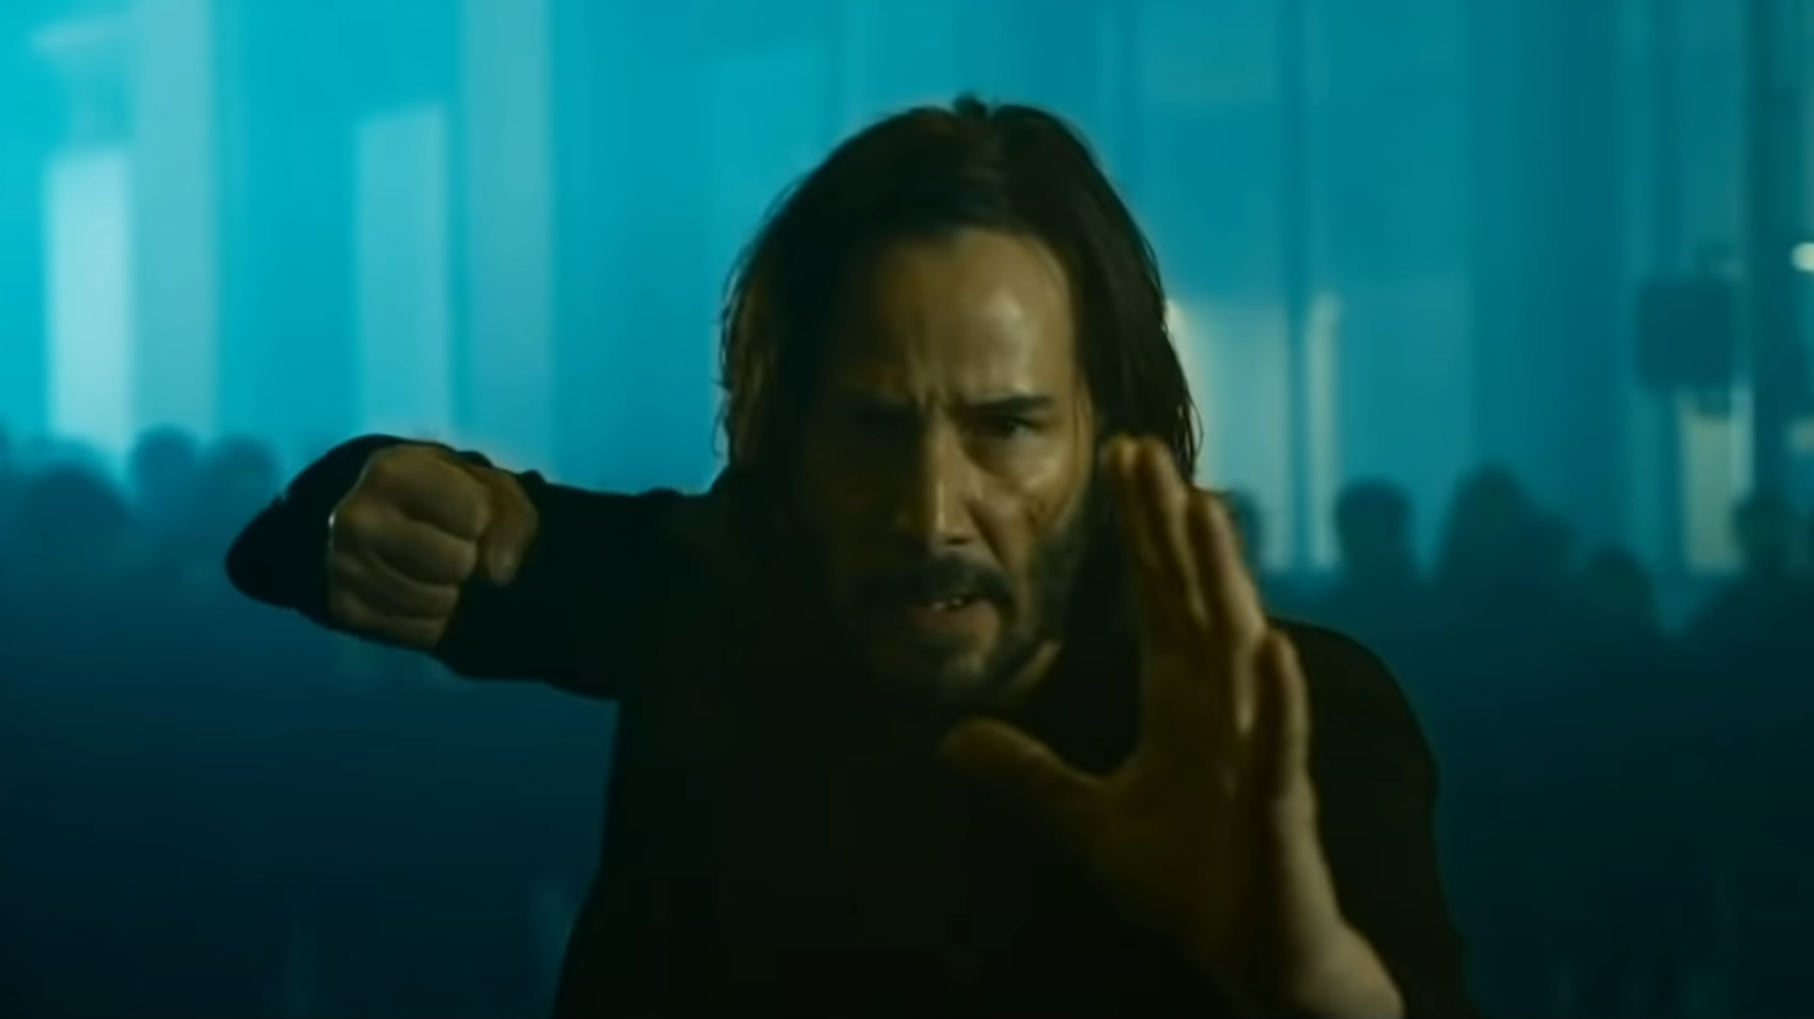 If Keanu Reeves doesn’t do some ‘John Wick’ sh*t in ‘Matrix 4’ it’ll be a misfire of epic proportions